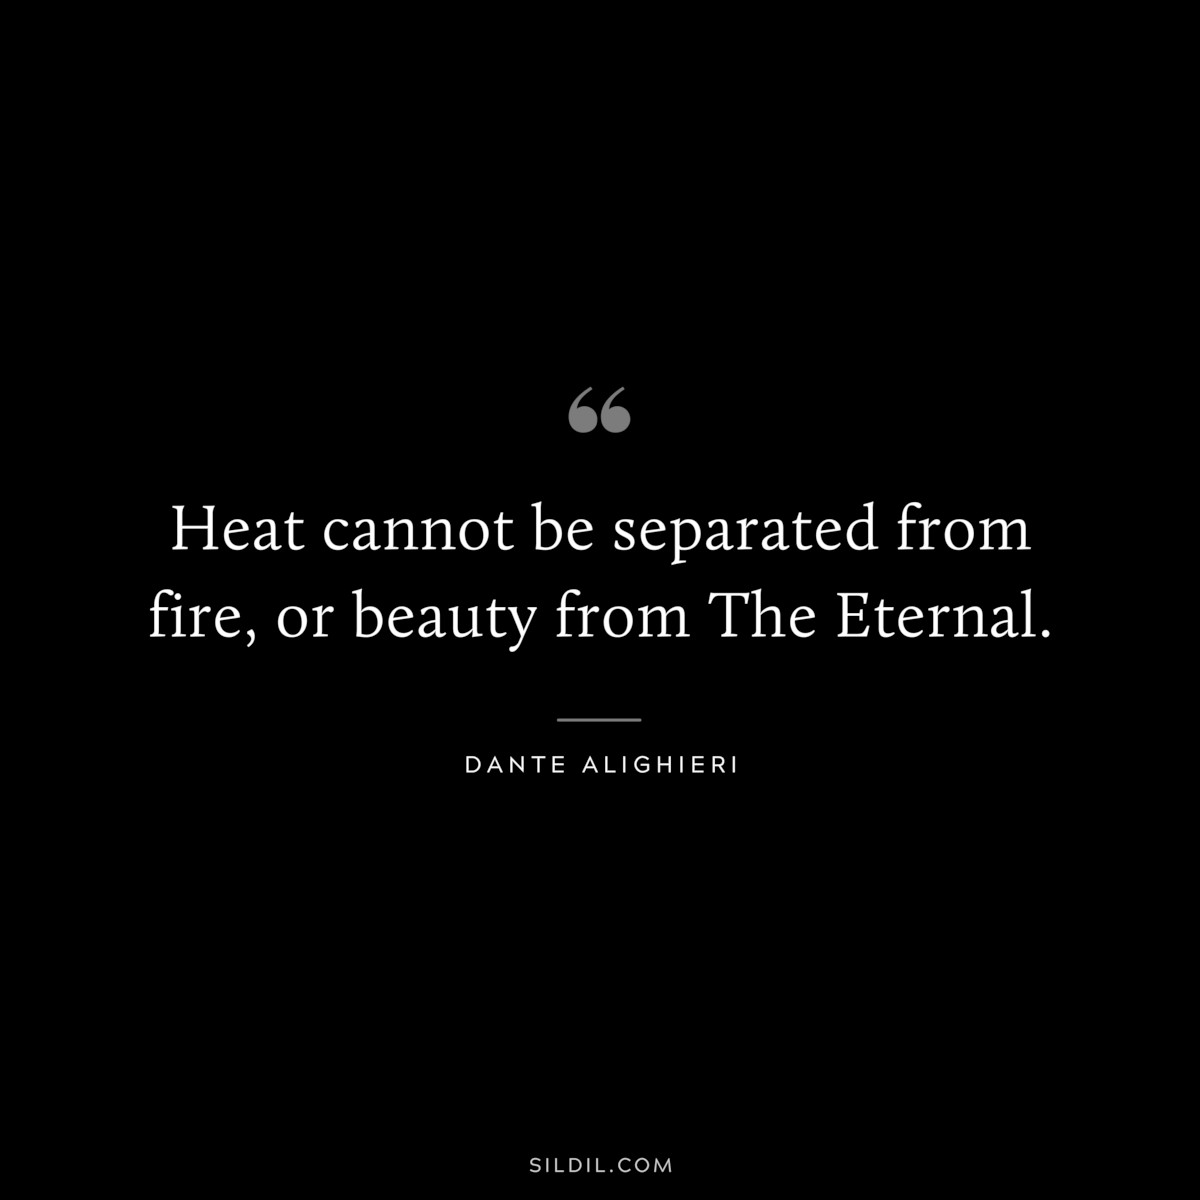 Heat cannot be separated from fire, or beauty from The Eternal. ― Dante Alighieri